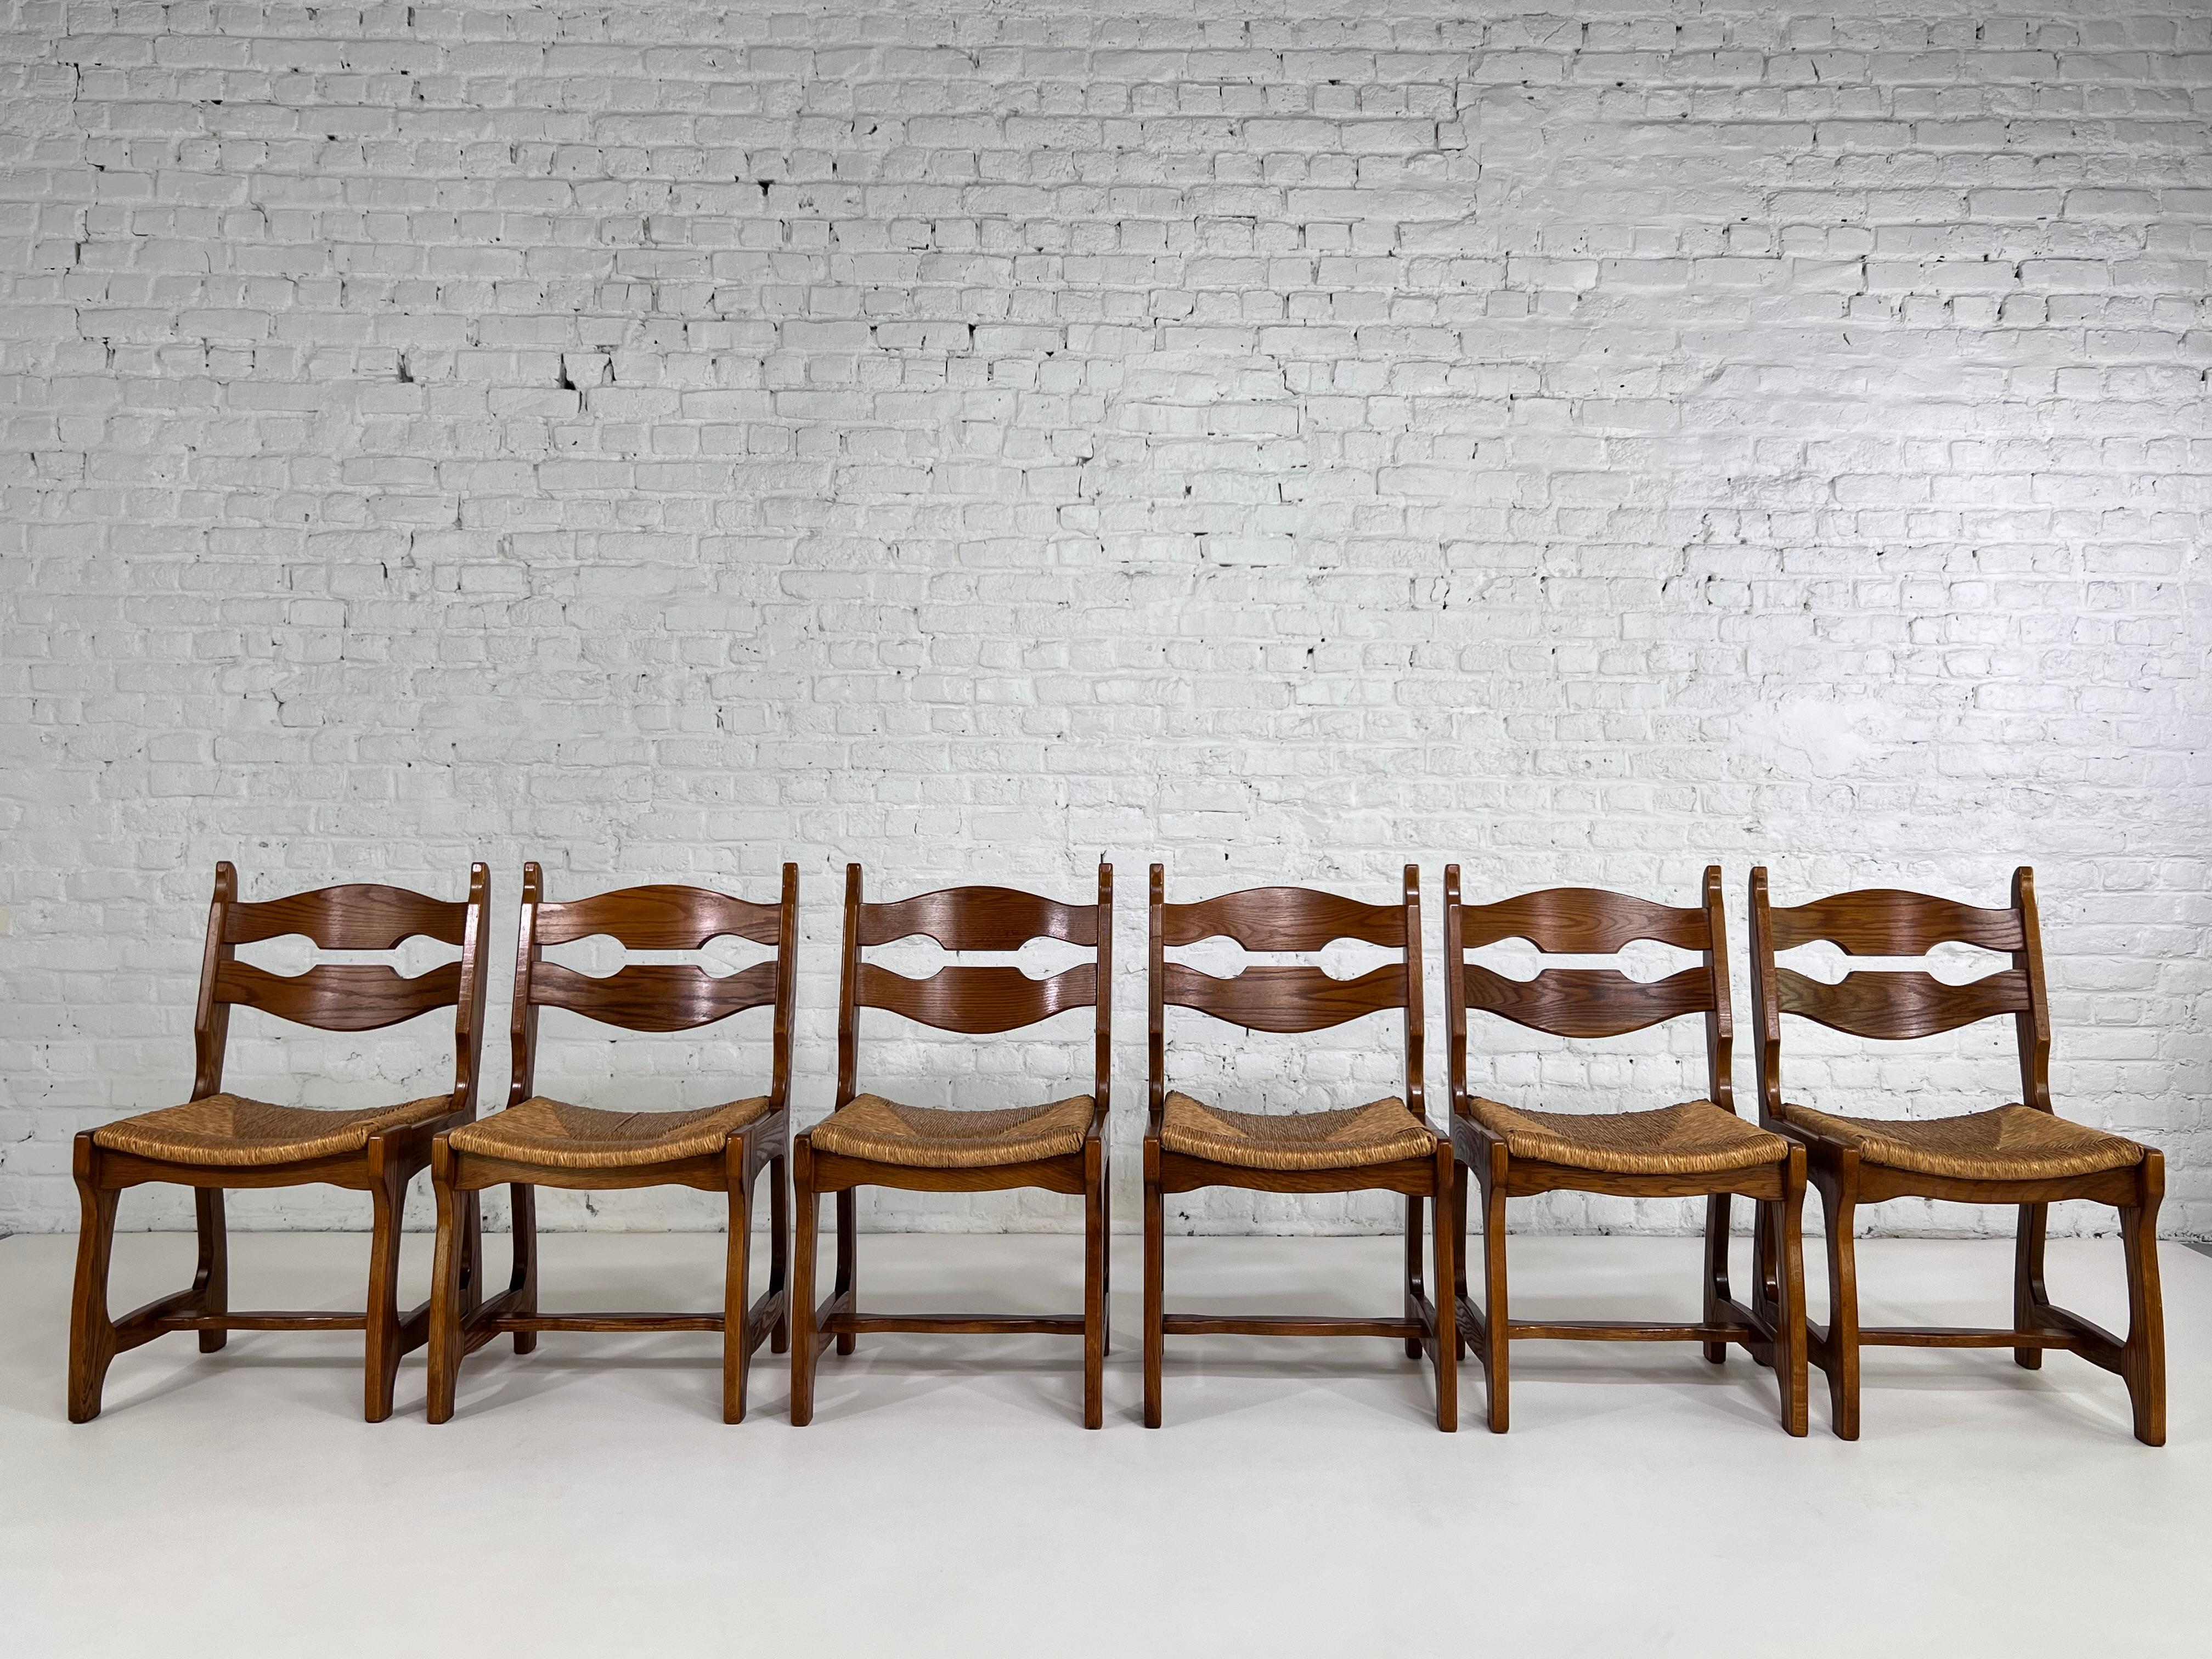 1950s Design Oak Wooden And Braided Straw Seats Set of 6 Chairs composed of a Brutalist wooden structure adorned with a braided straw seat.